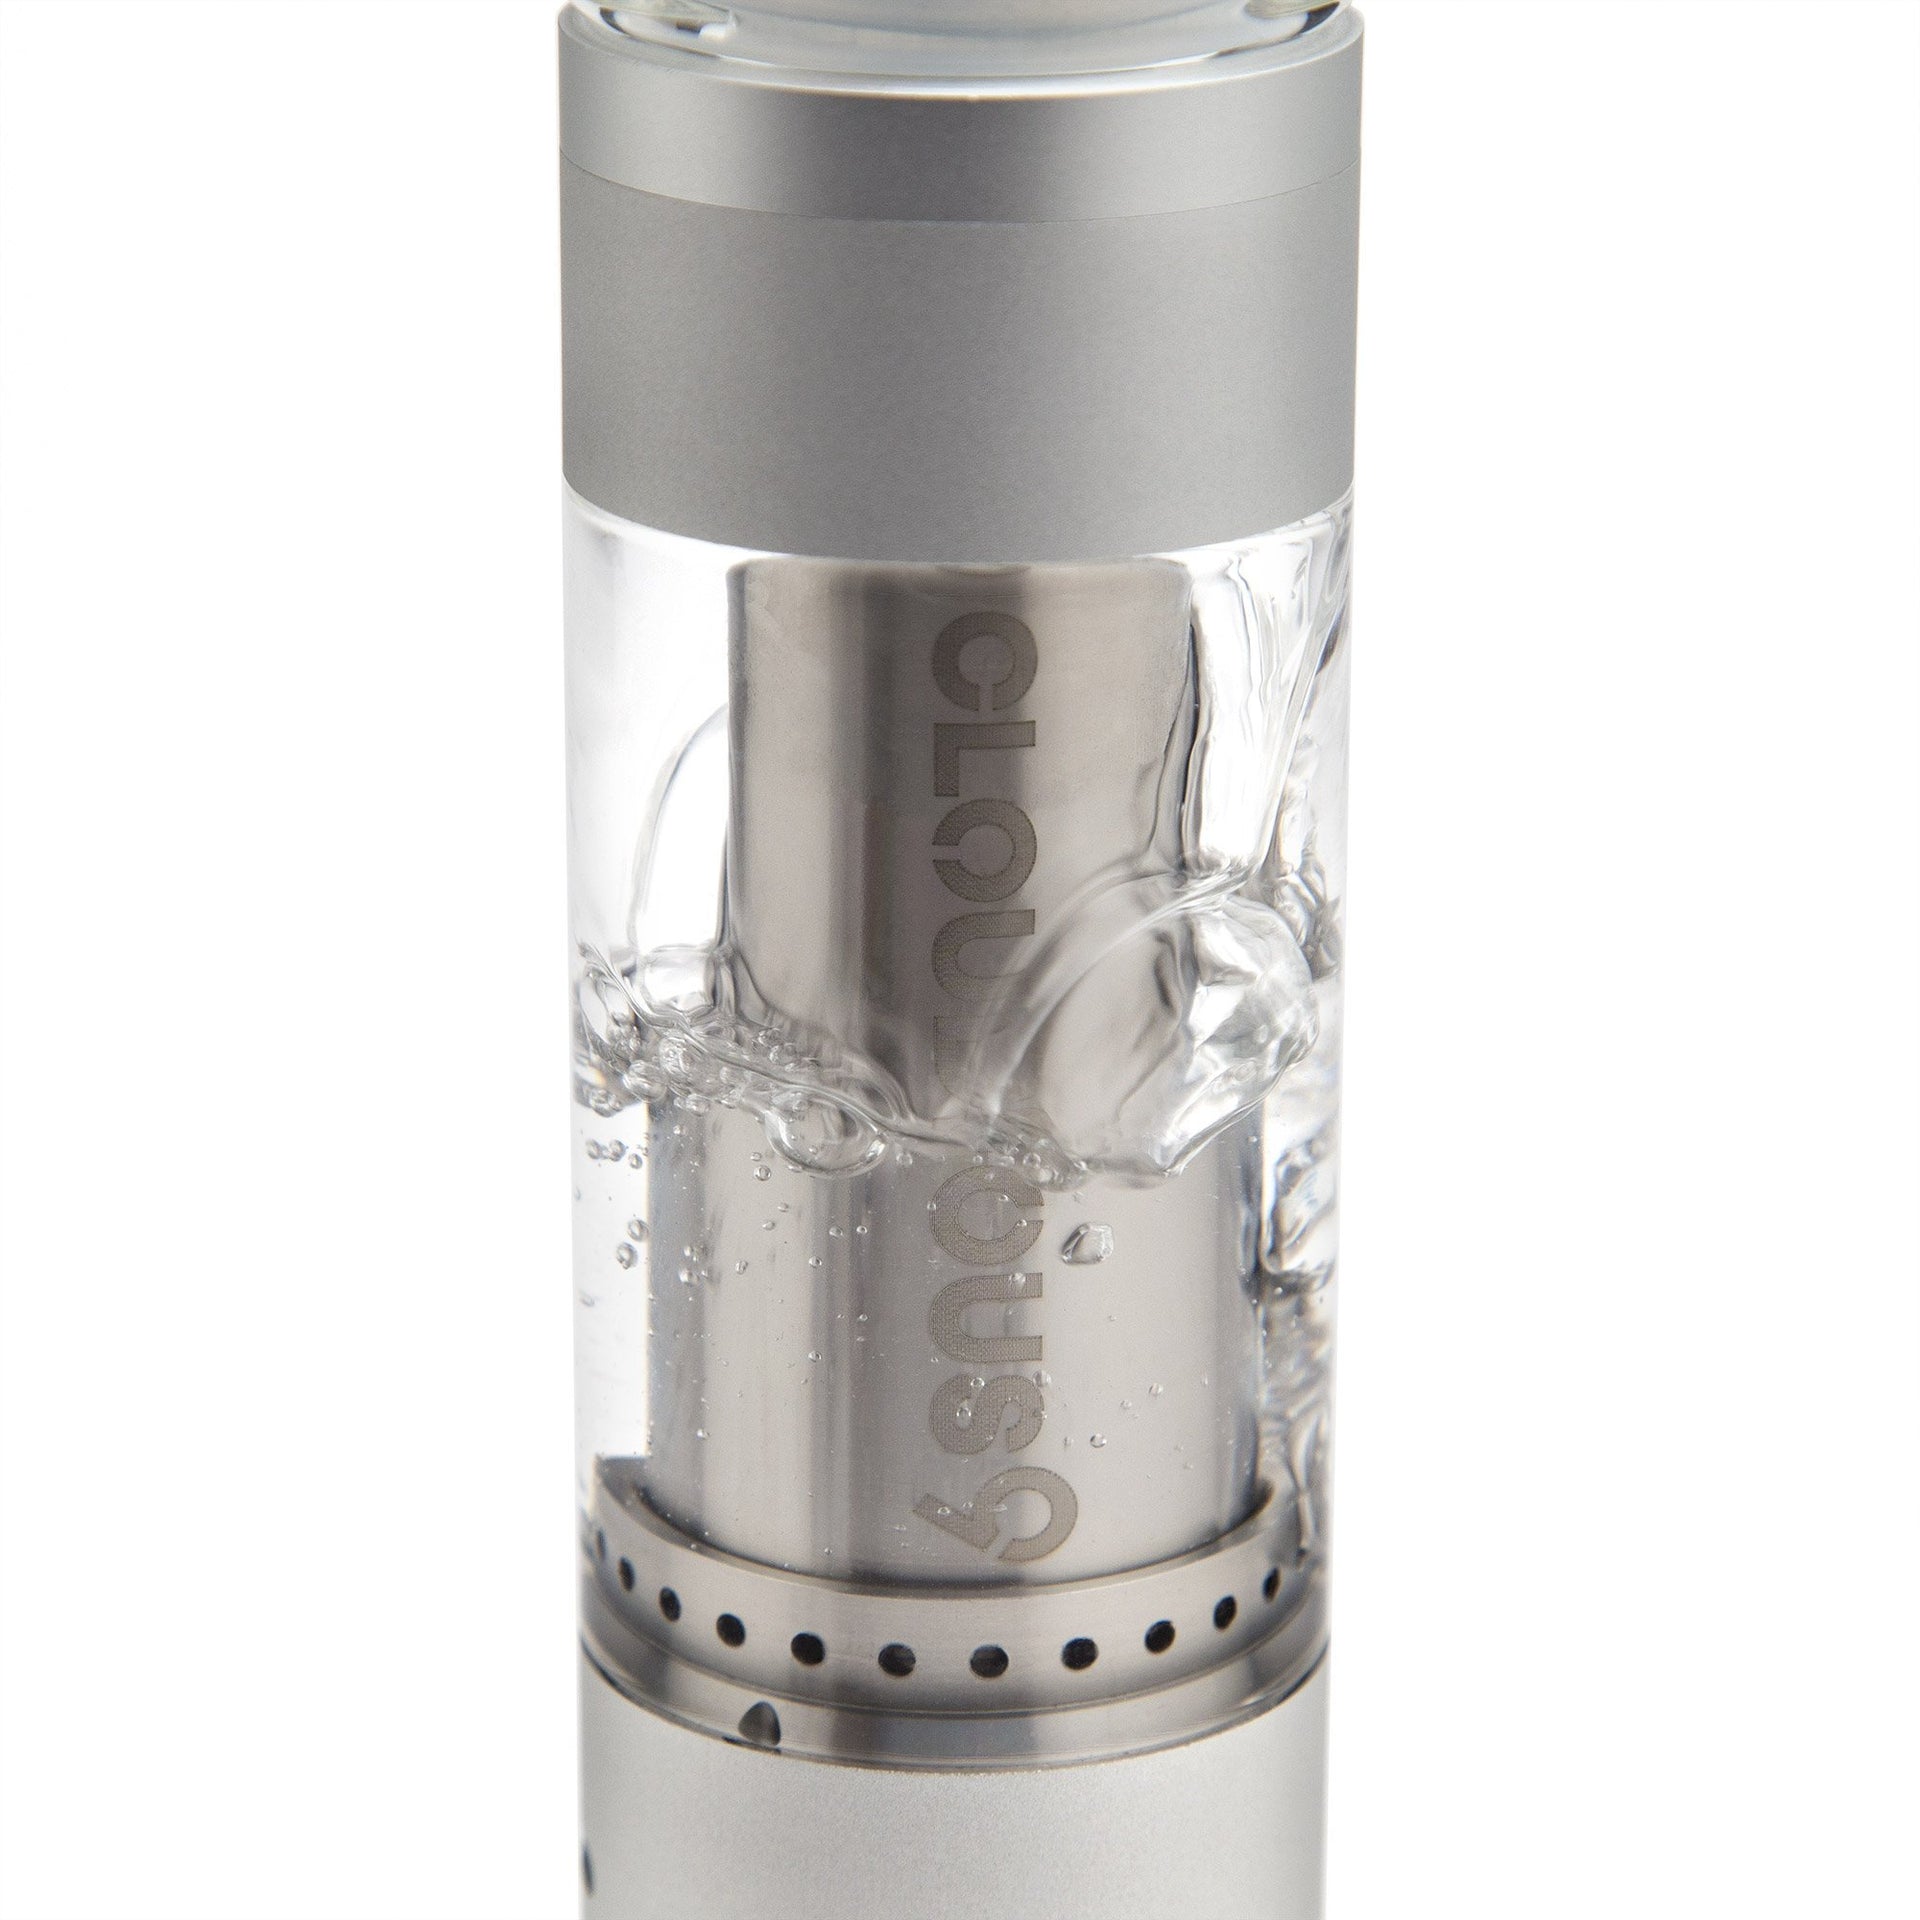 Cloudious9 Hydrology9 Liquid Filtration Vaporizer - 420 Science - The most trusted online smoke shop.